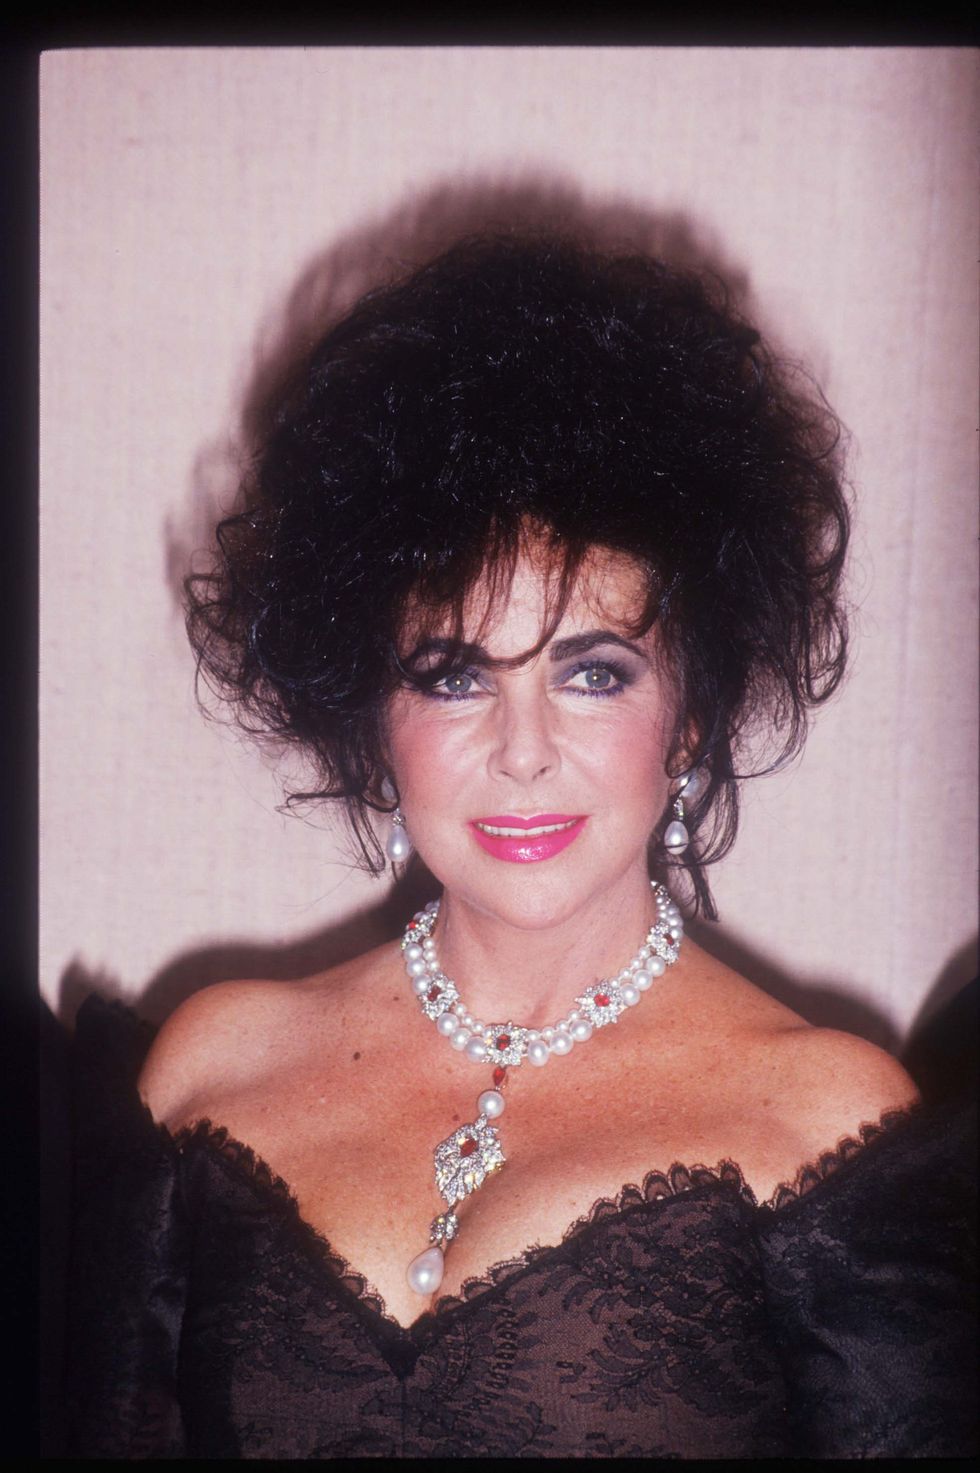 113442 01 actress elizabeth taylor stands january 19, 1992 in los angeles, ca taylor became a child star after her appearance in national velvet and later won academy awards for her performances in butterfield 8 and  whos afraid of virginia woolf photo by barry kingliaison